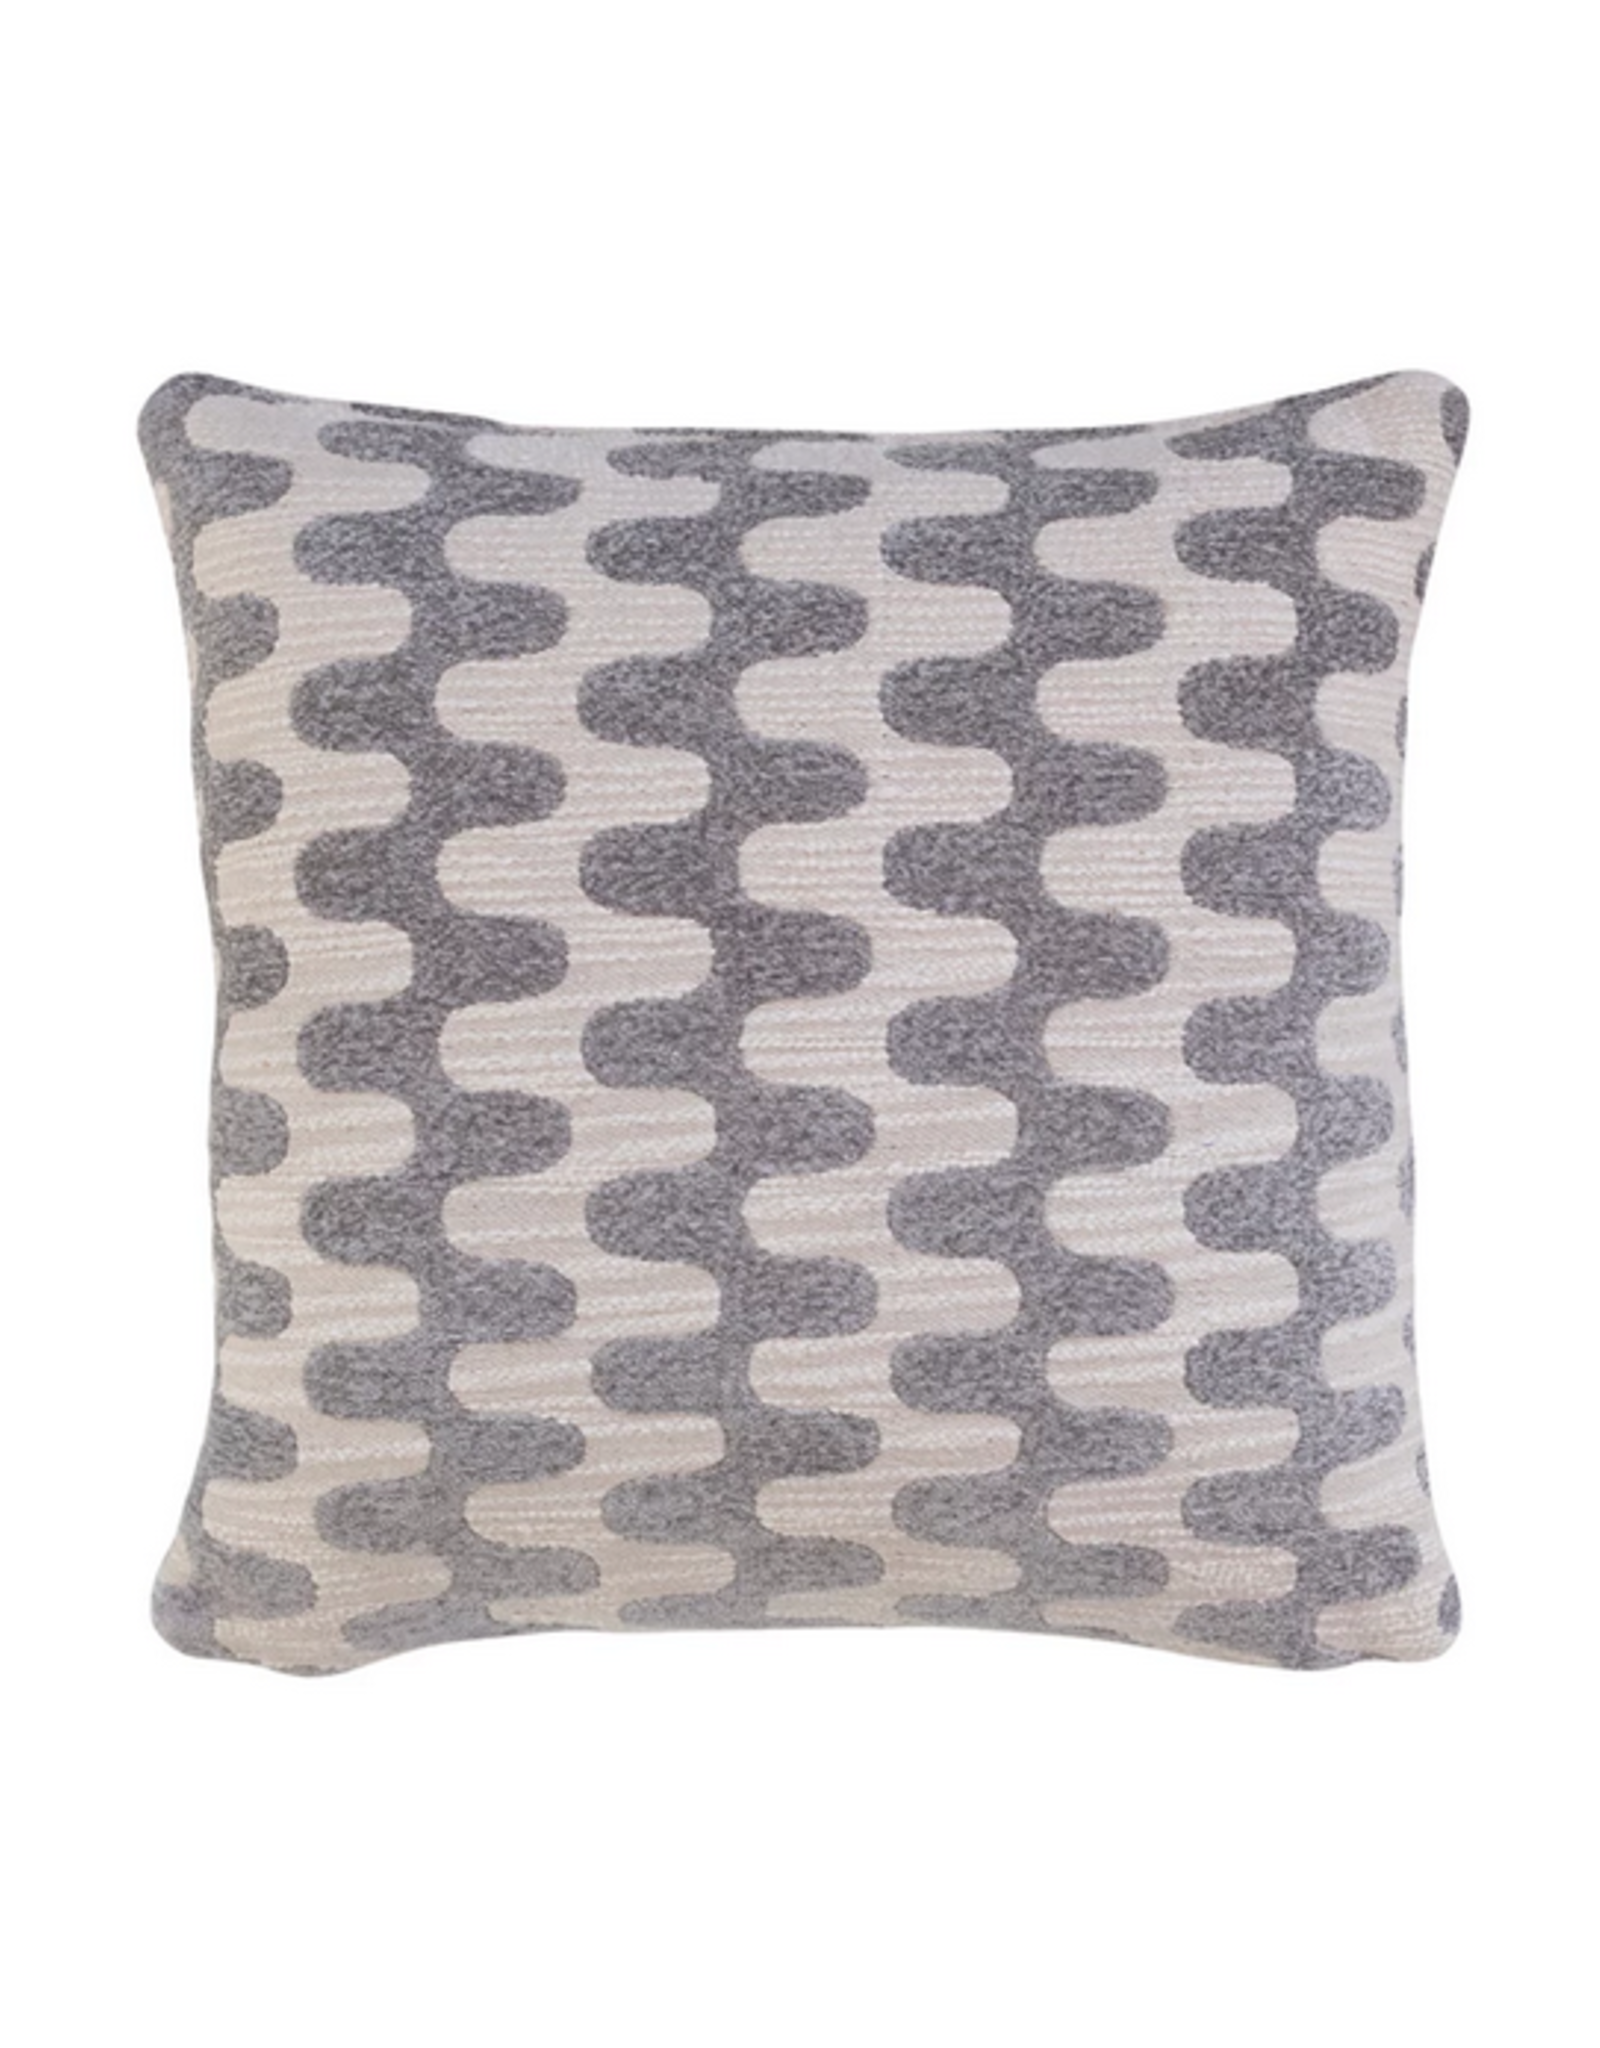 Woven Cotton Jacquard Pillow with Abstract Pattern L18"